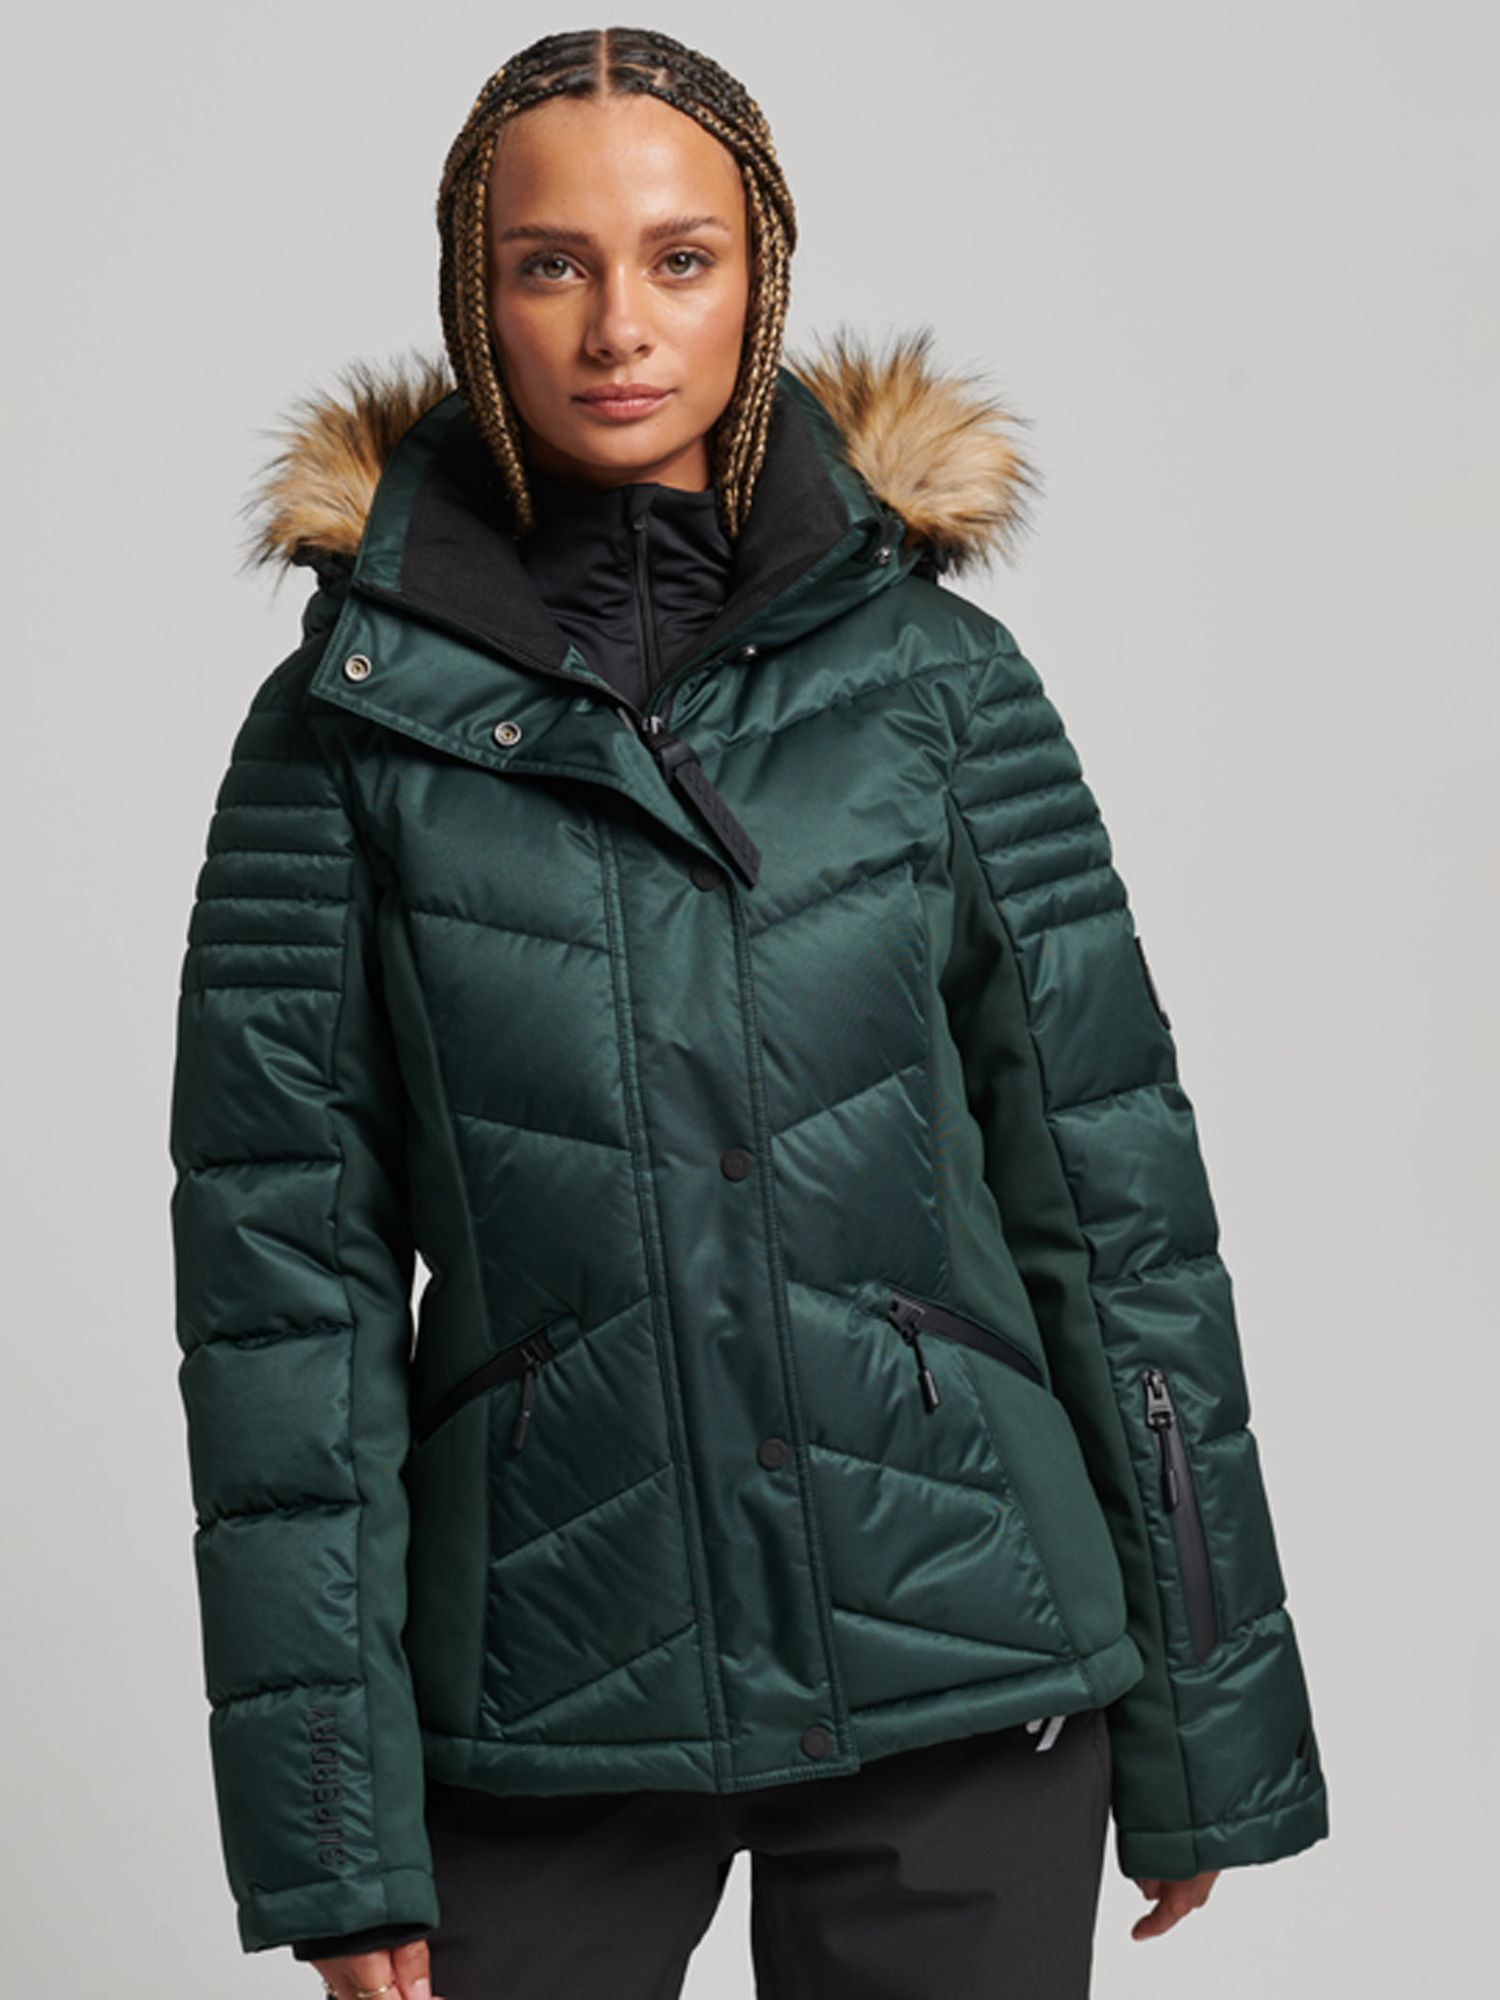 Superdry Snow Luxe Puffer Jacket, Eagle Green at John Lewis and Partners